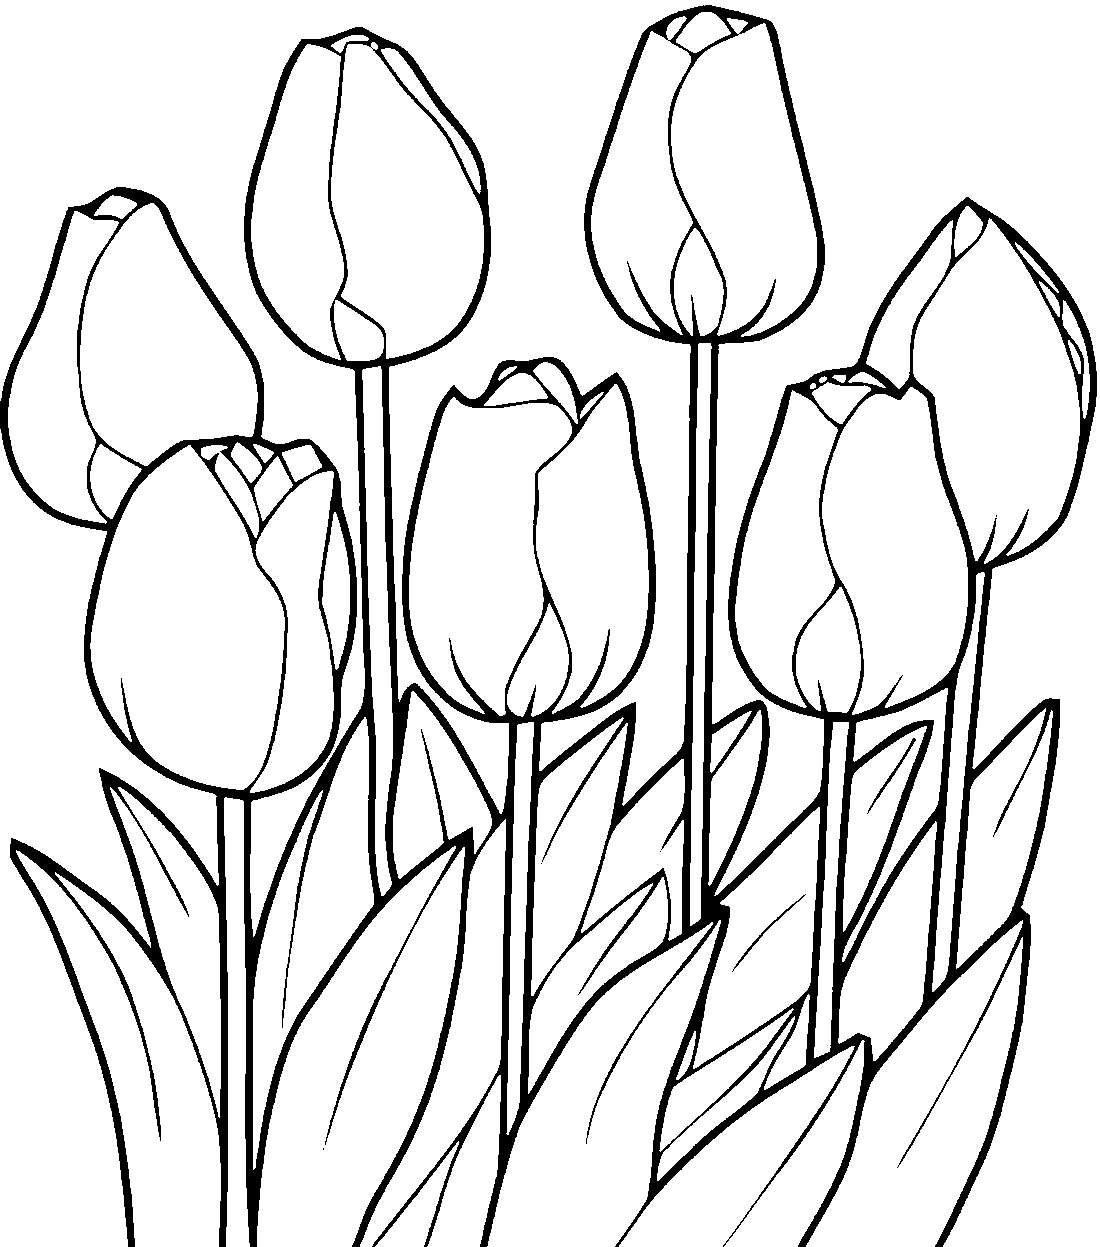 Coloring page Tulips Growing tulips